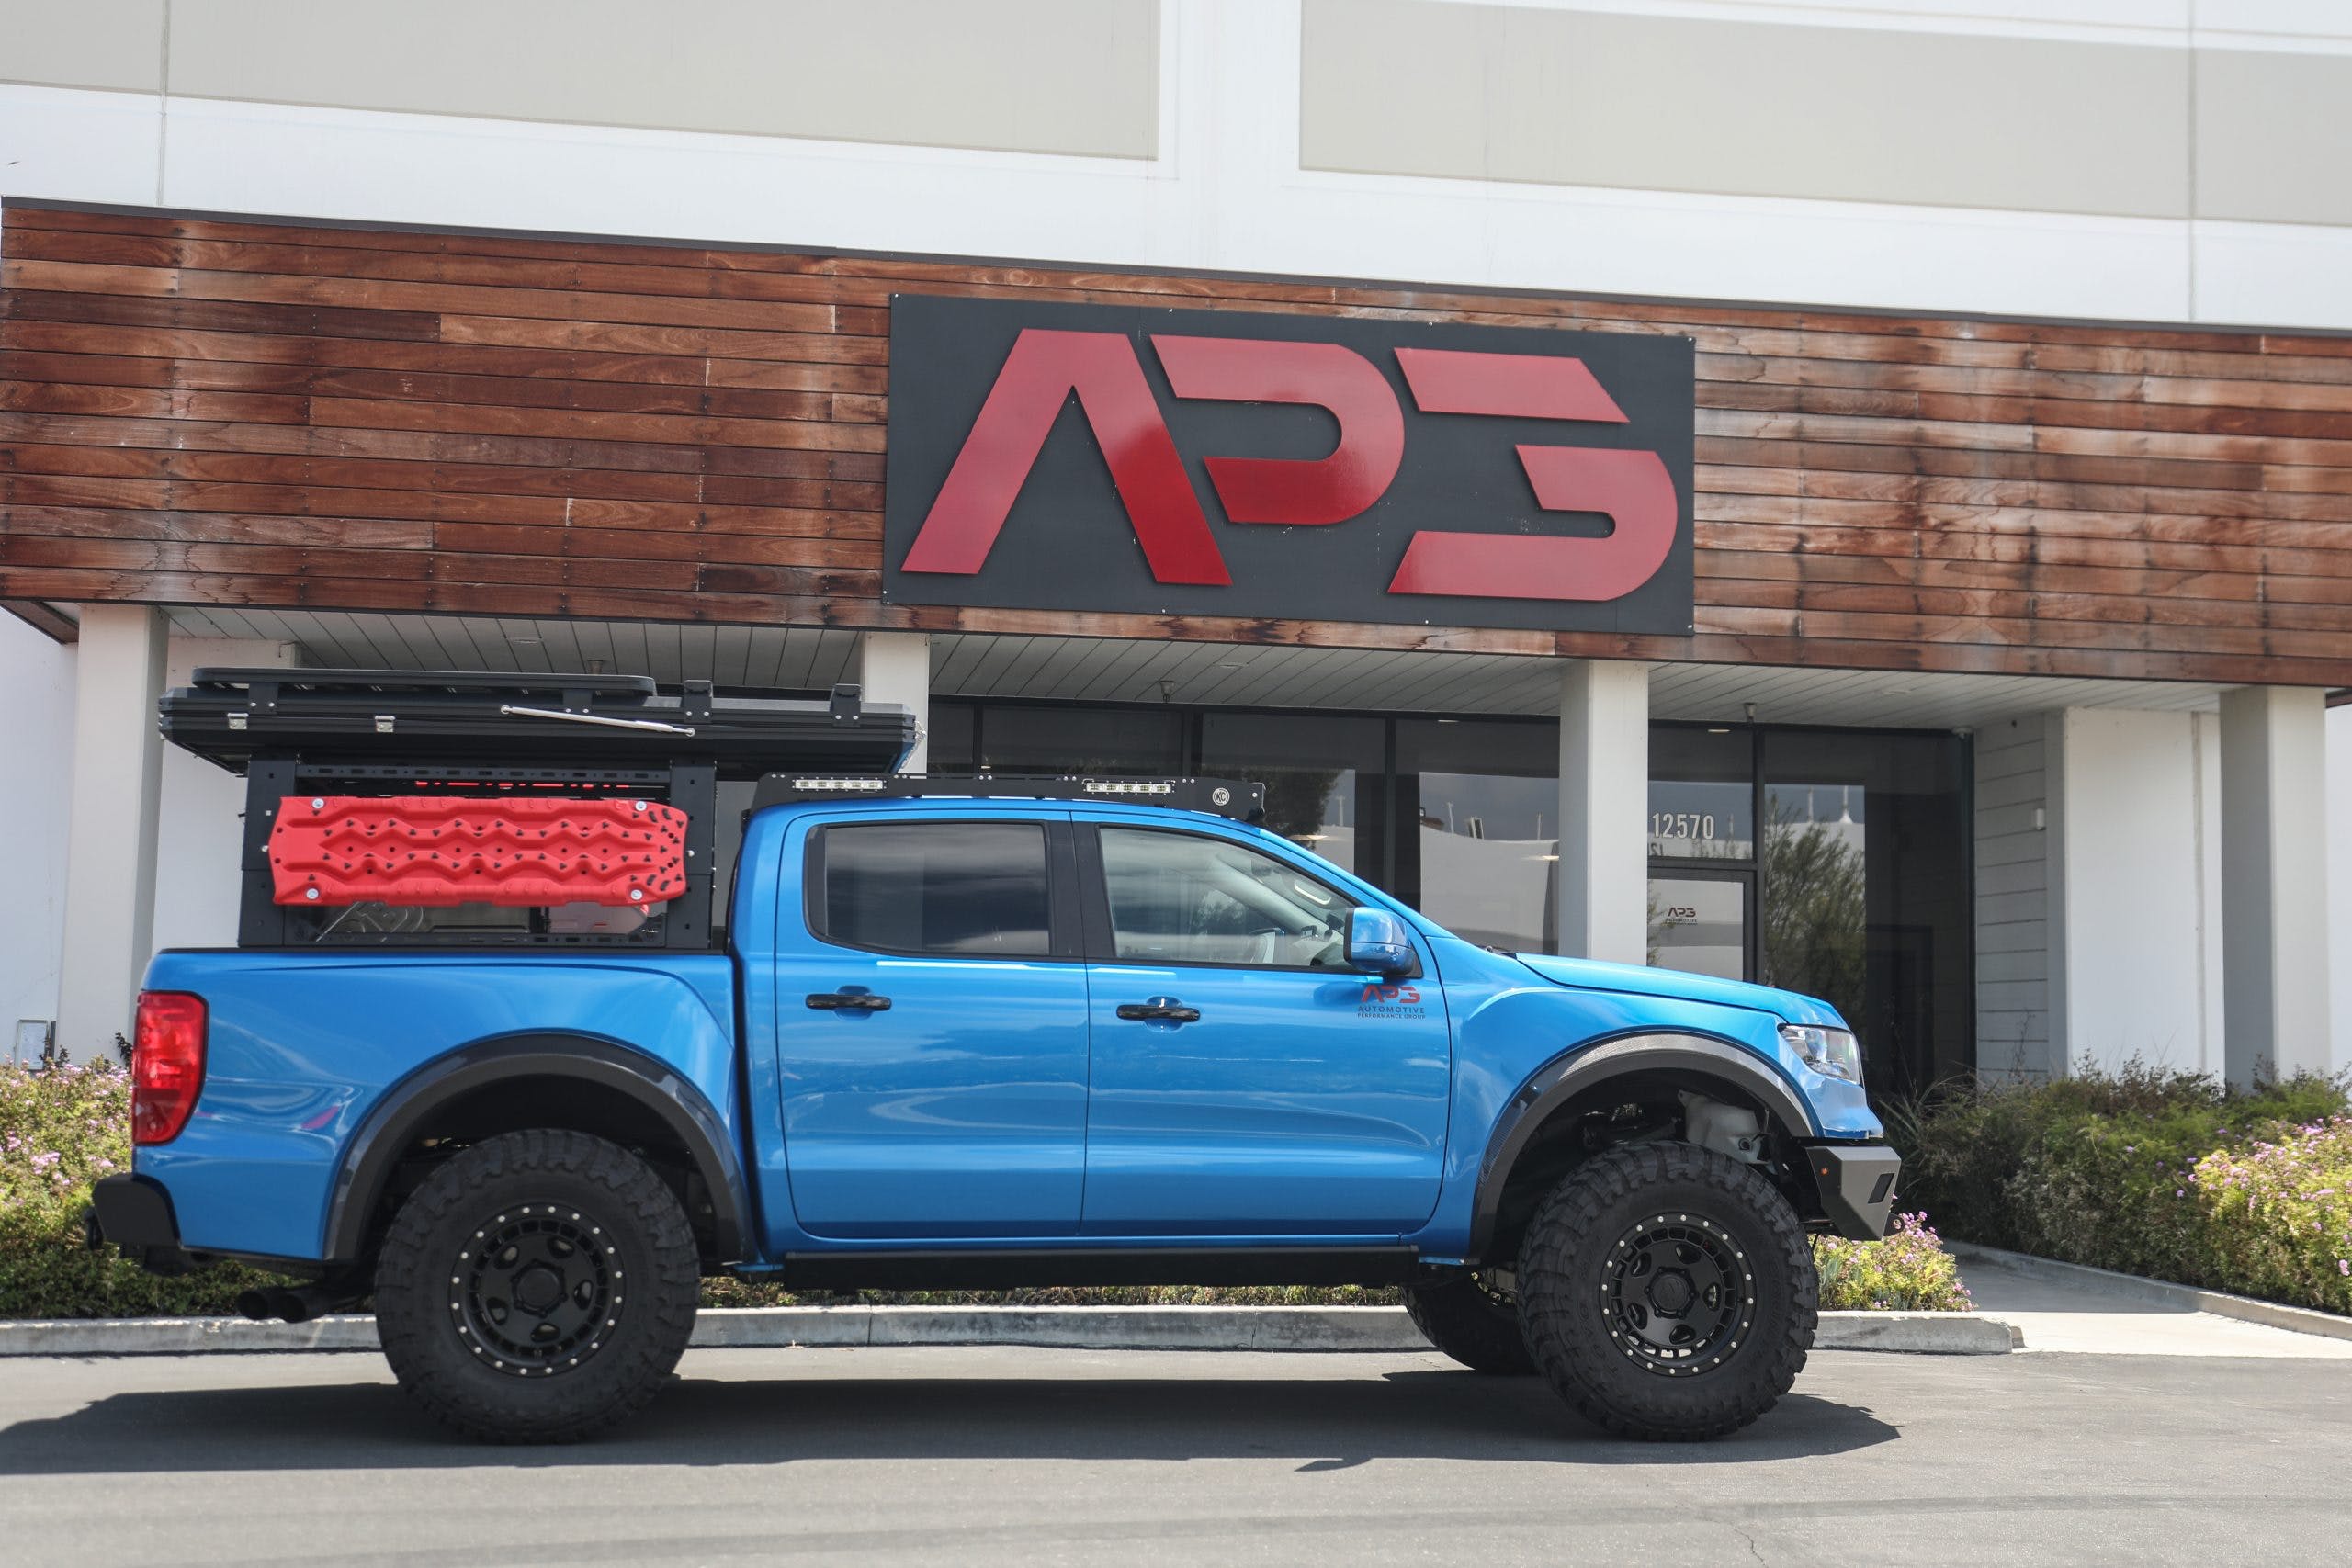 How APG builds the Ranger that Ford won't - Hagerty Media